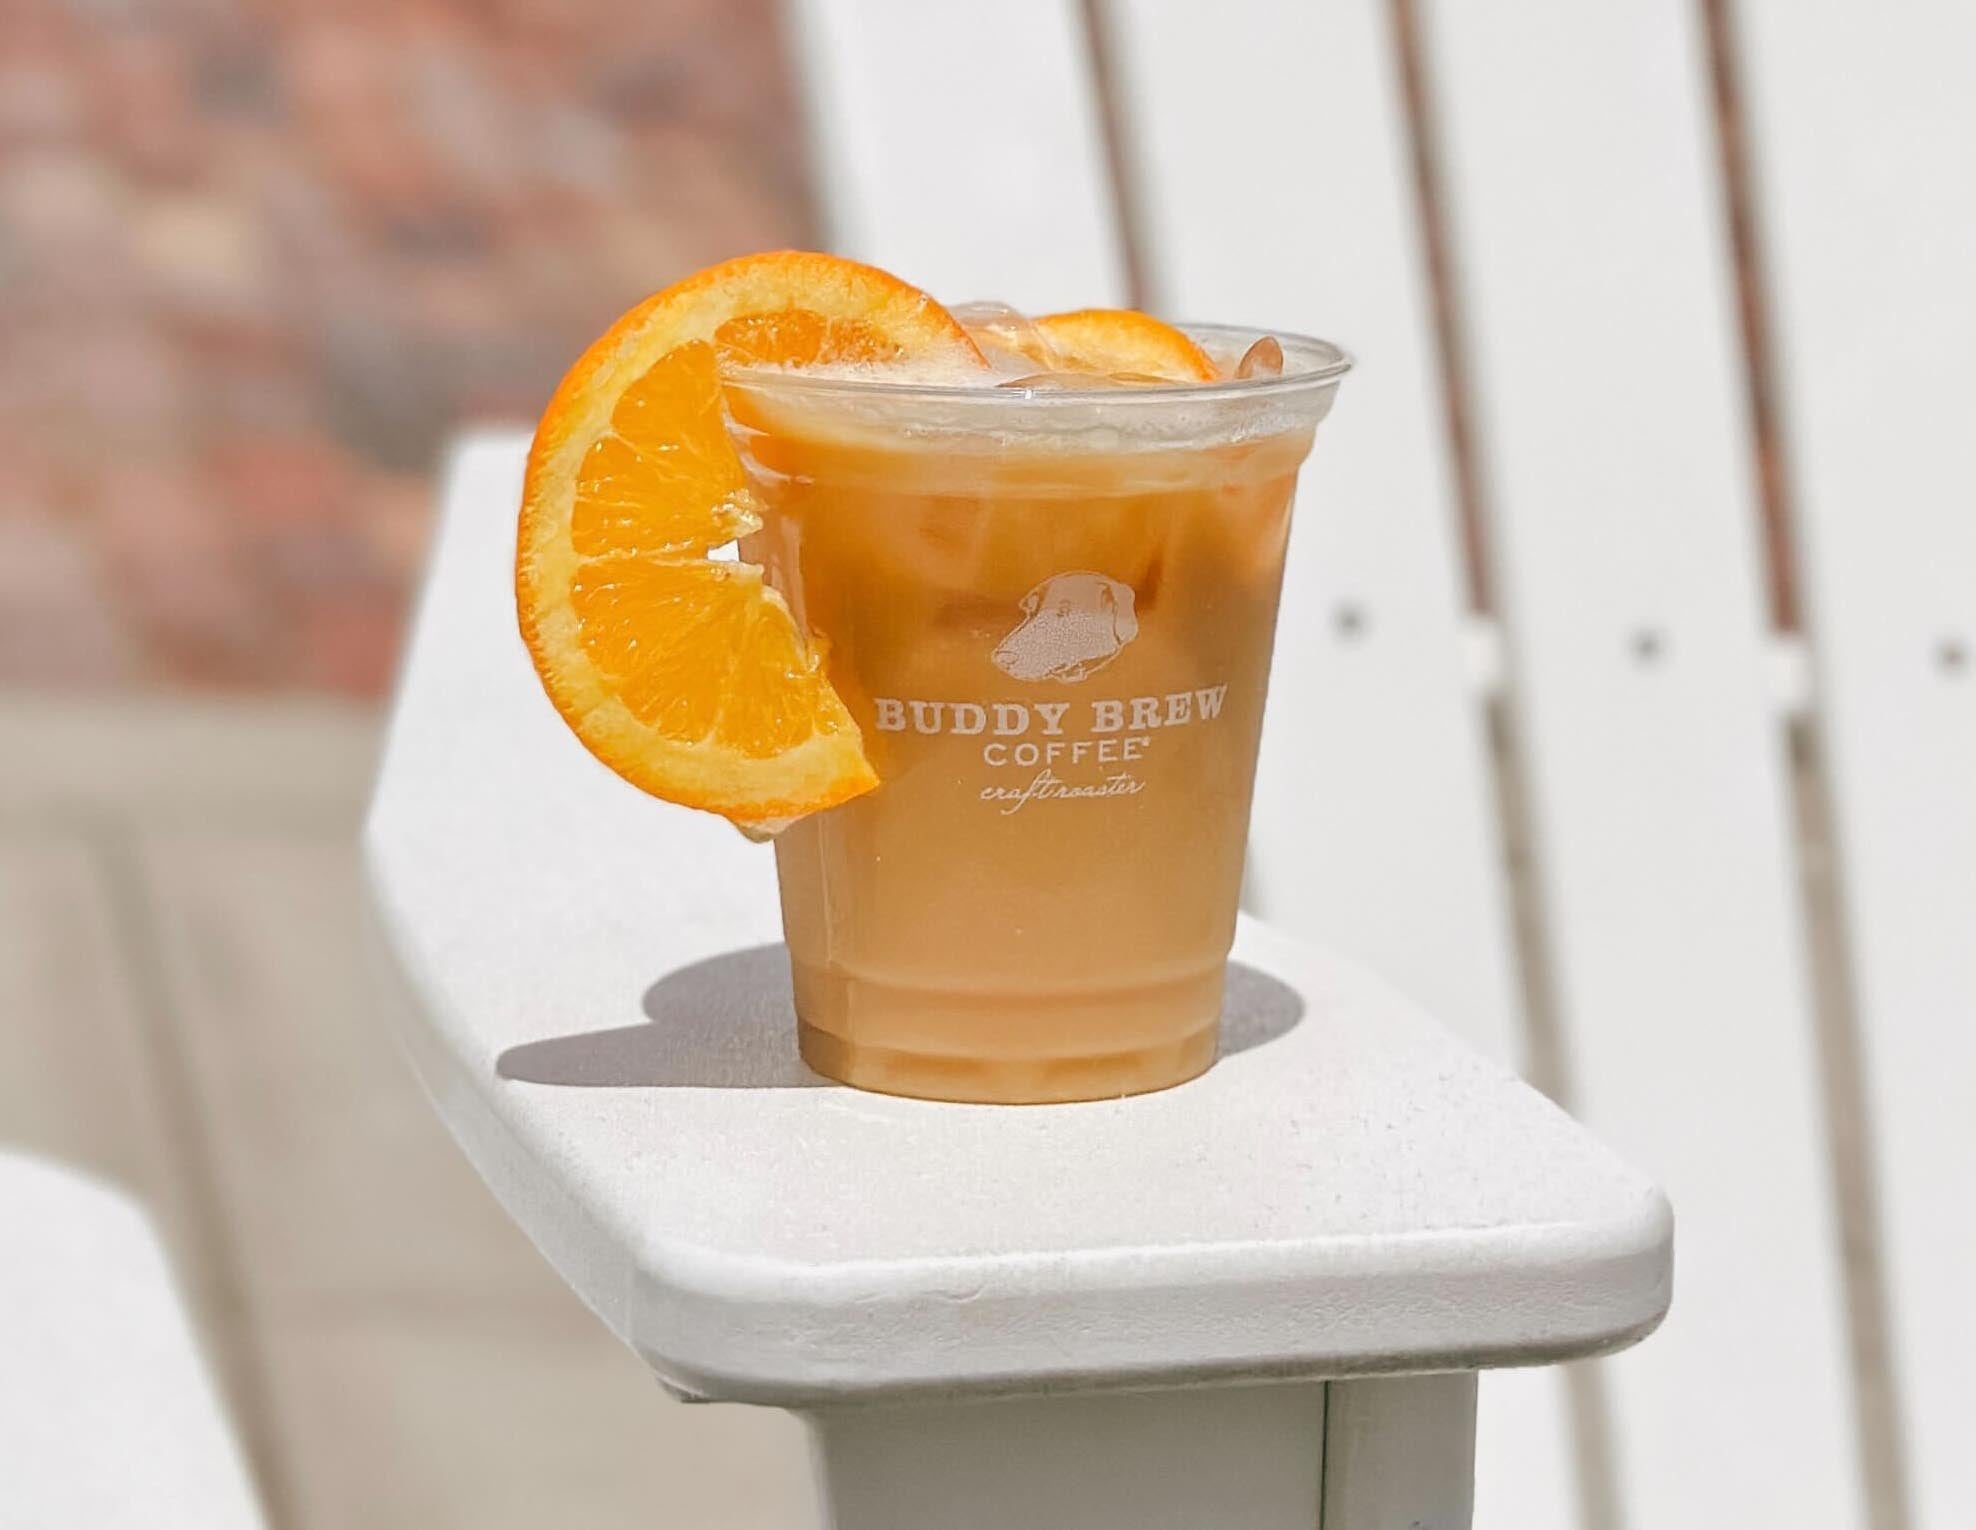 Buddy Brew Coffee to launch ‘Bucco Bruce’ on Creamsicle Day Aug. 14